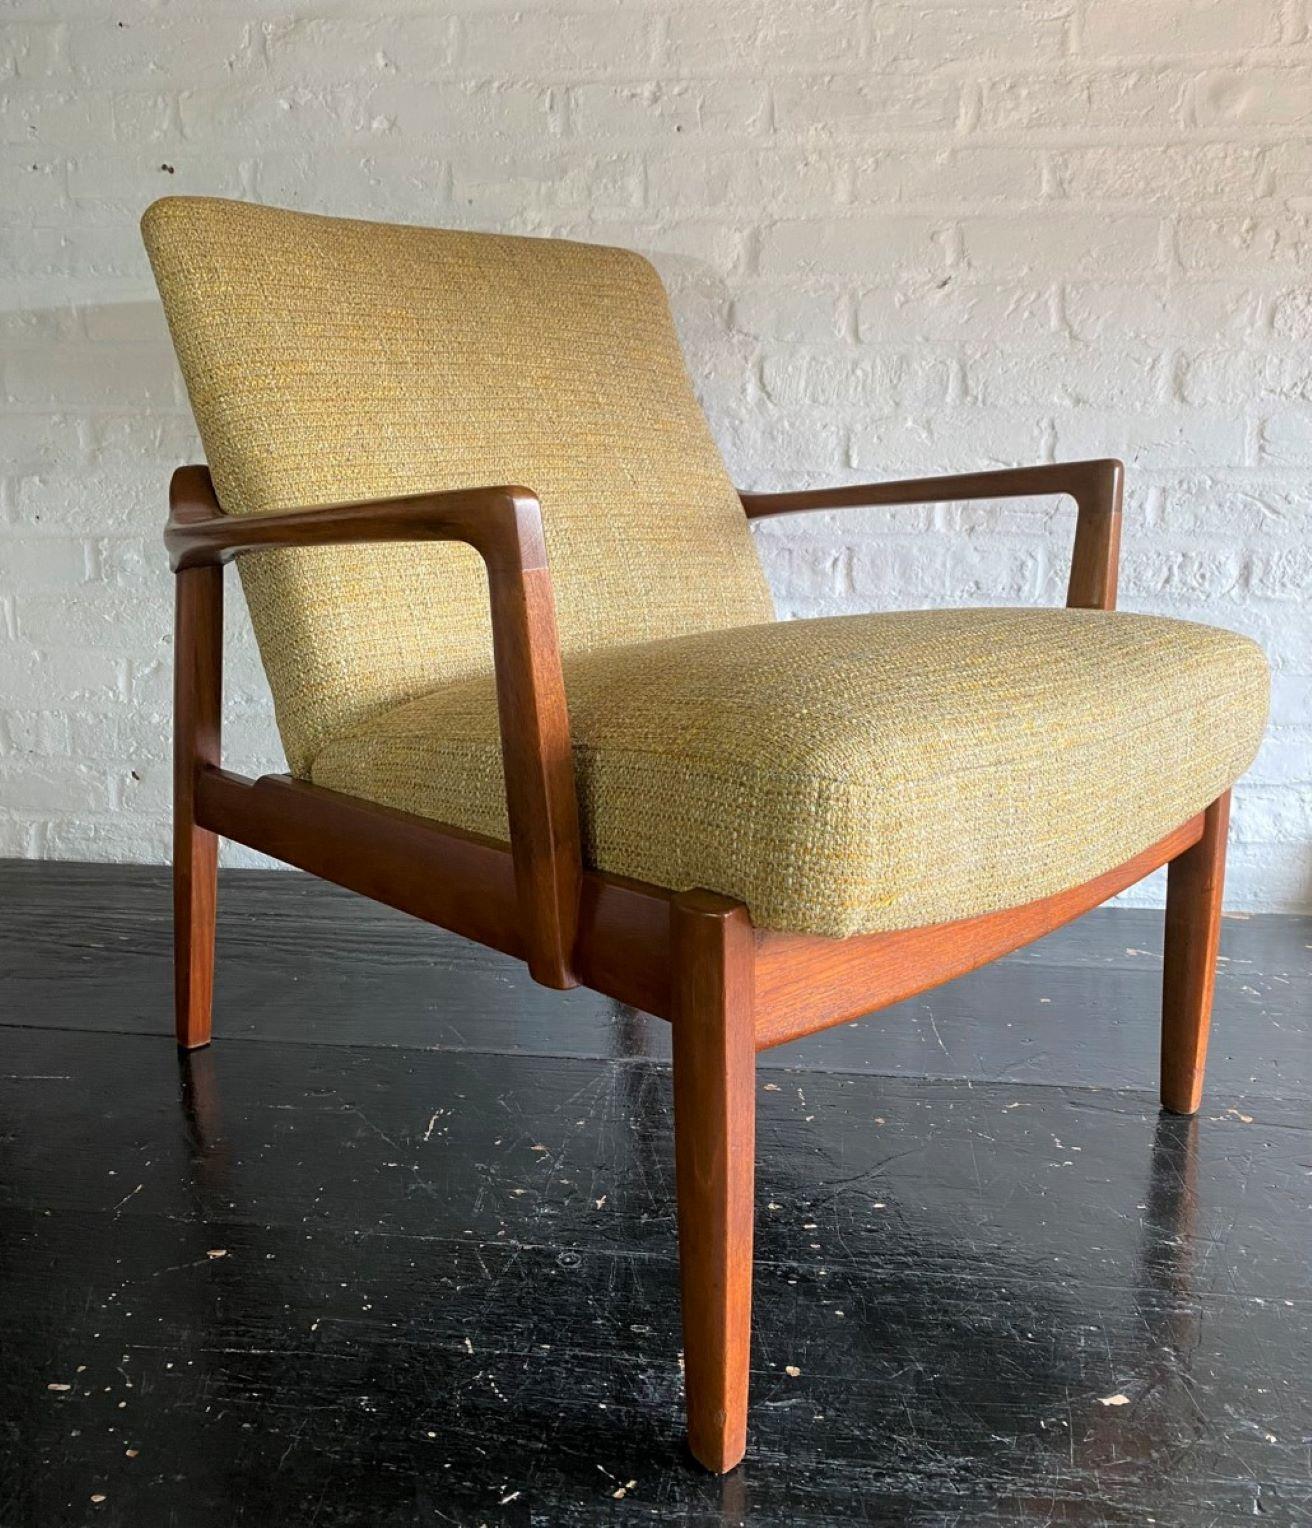 Danish teak lounge chair by Tove & Edvard Kindt Larsen For France & Son, Danish, 1958

Danish Teak Lounge chair by husband & wife designers Tove & Edvard Kindt-Larsen. This hard to find example from 1958 has a teak frame around fixed cushions. The